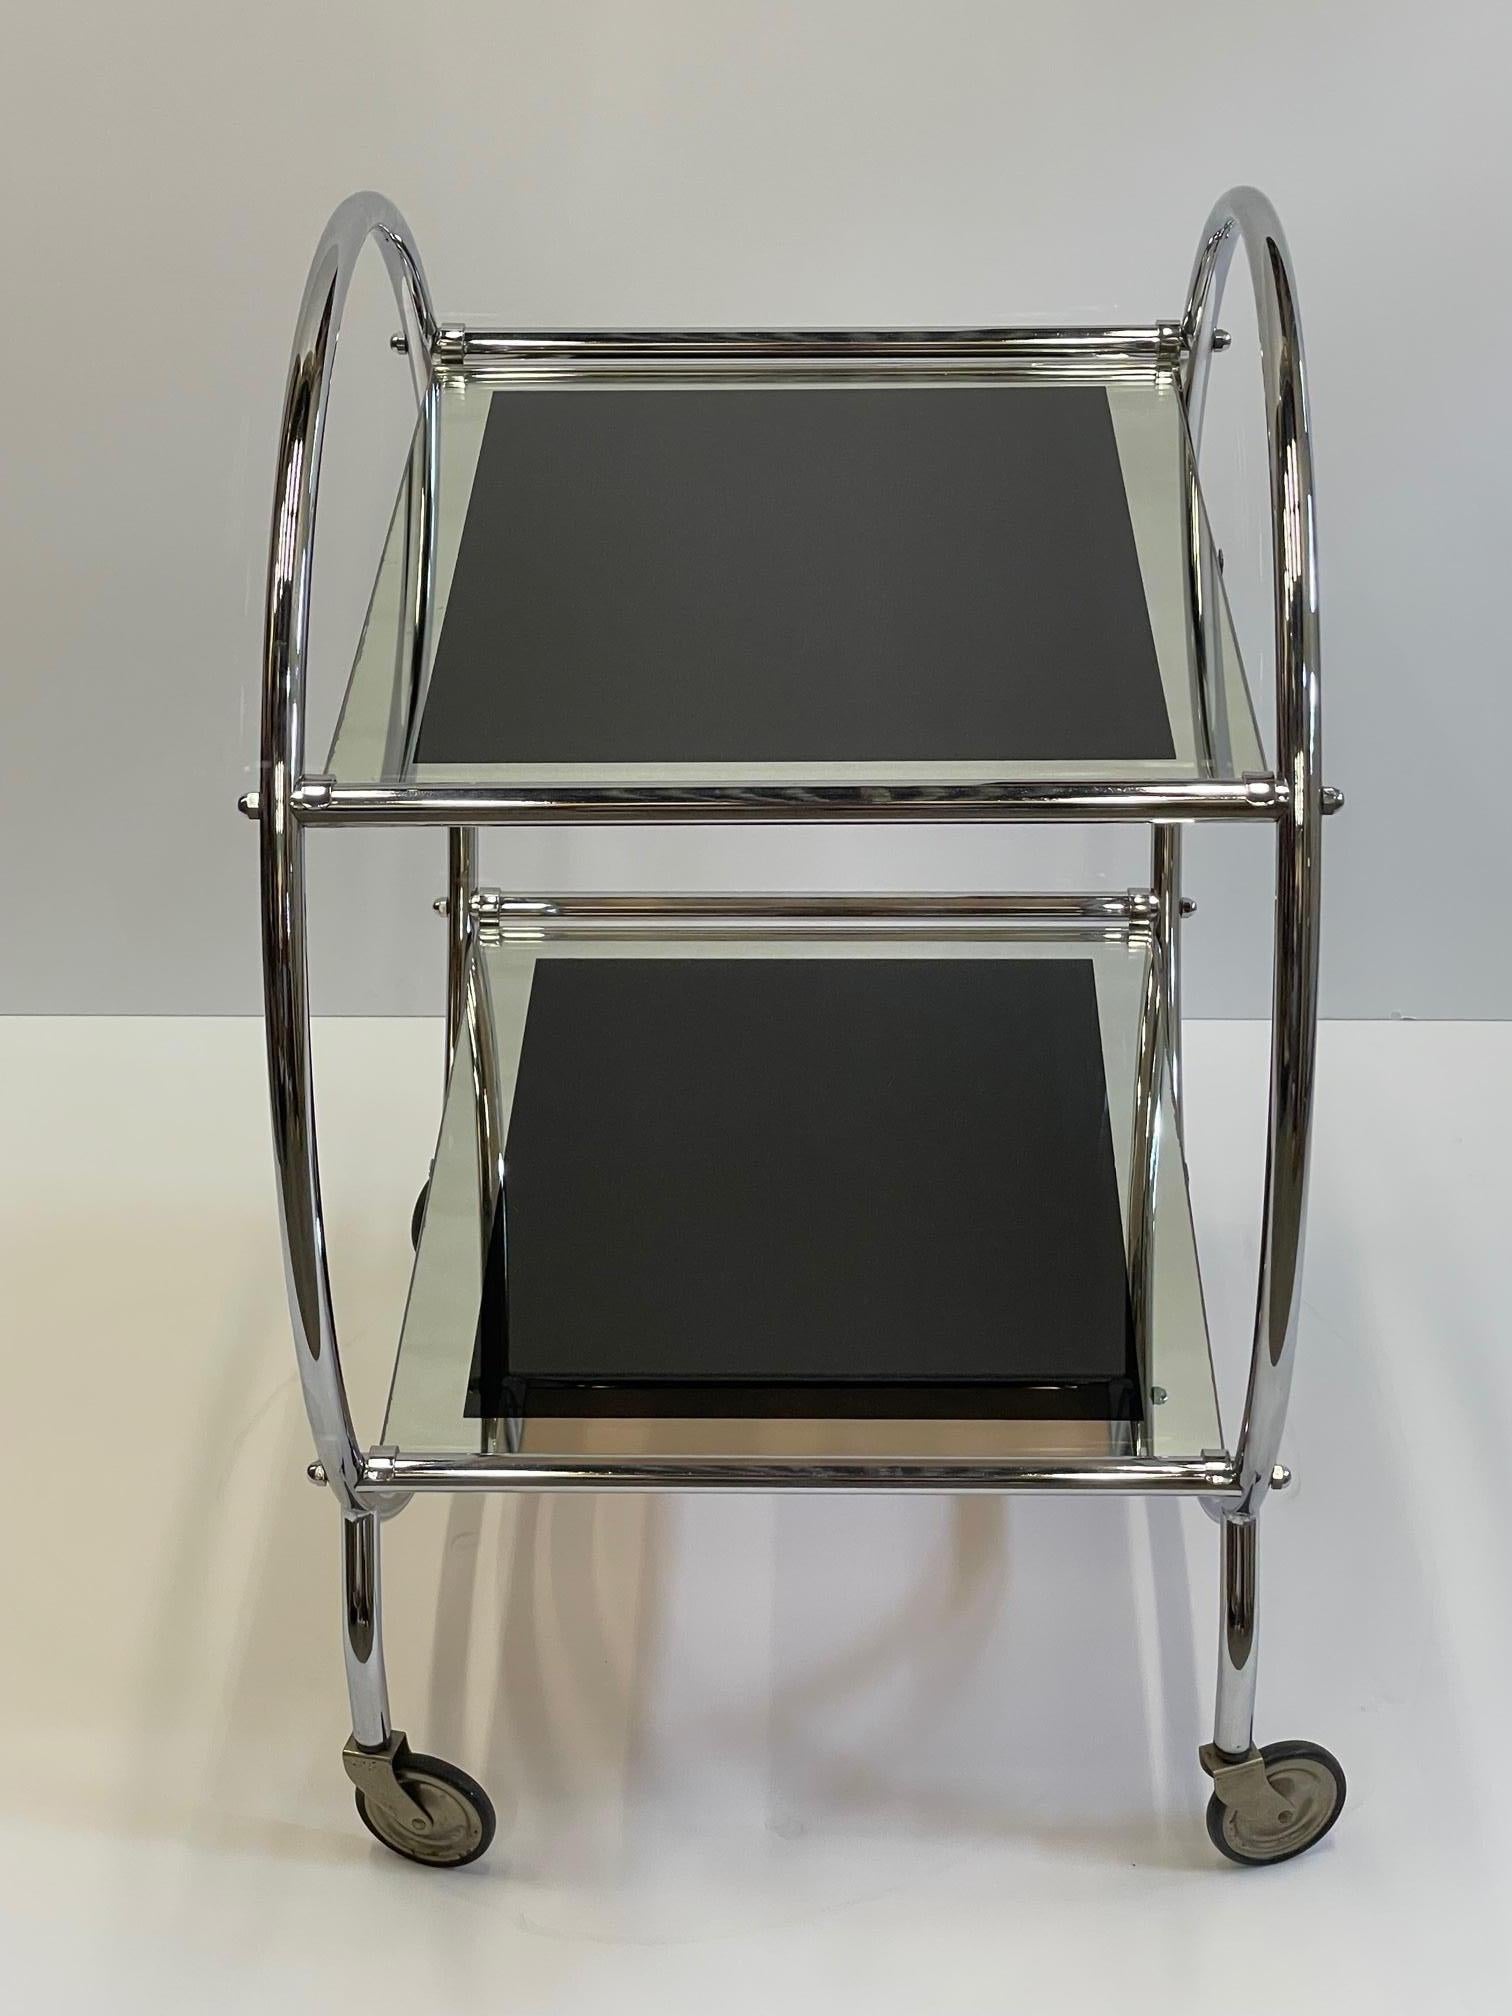 Glamorous chrome mid century modern bar cart on casters having round sides and two tiers. The glass surfaces are super sexy in black glass surrounded by mirror.
Measures: Lower shelf 10